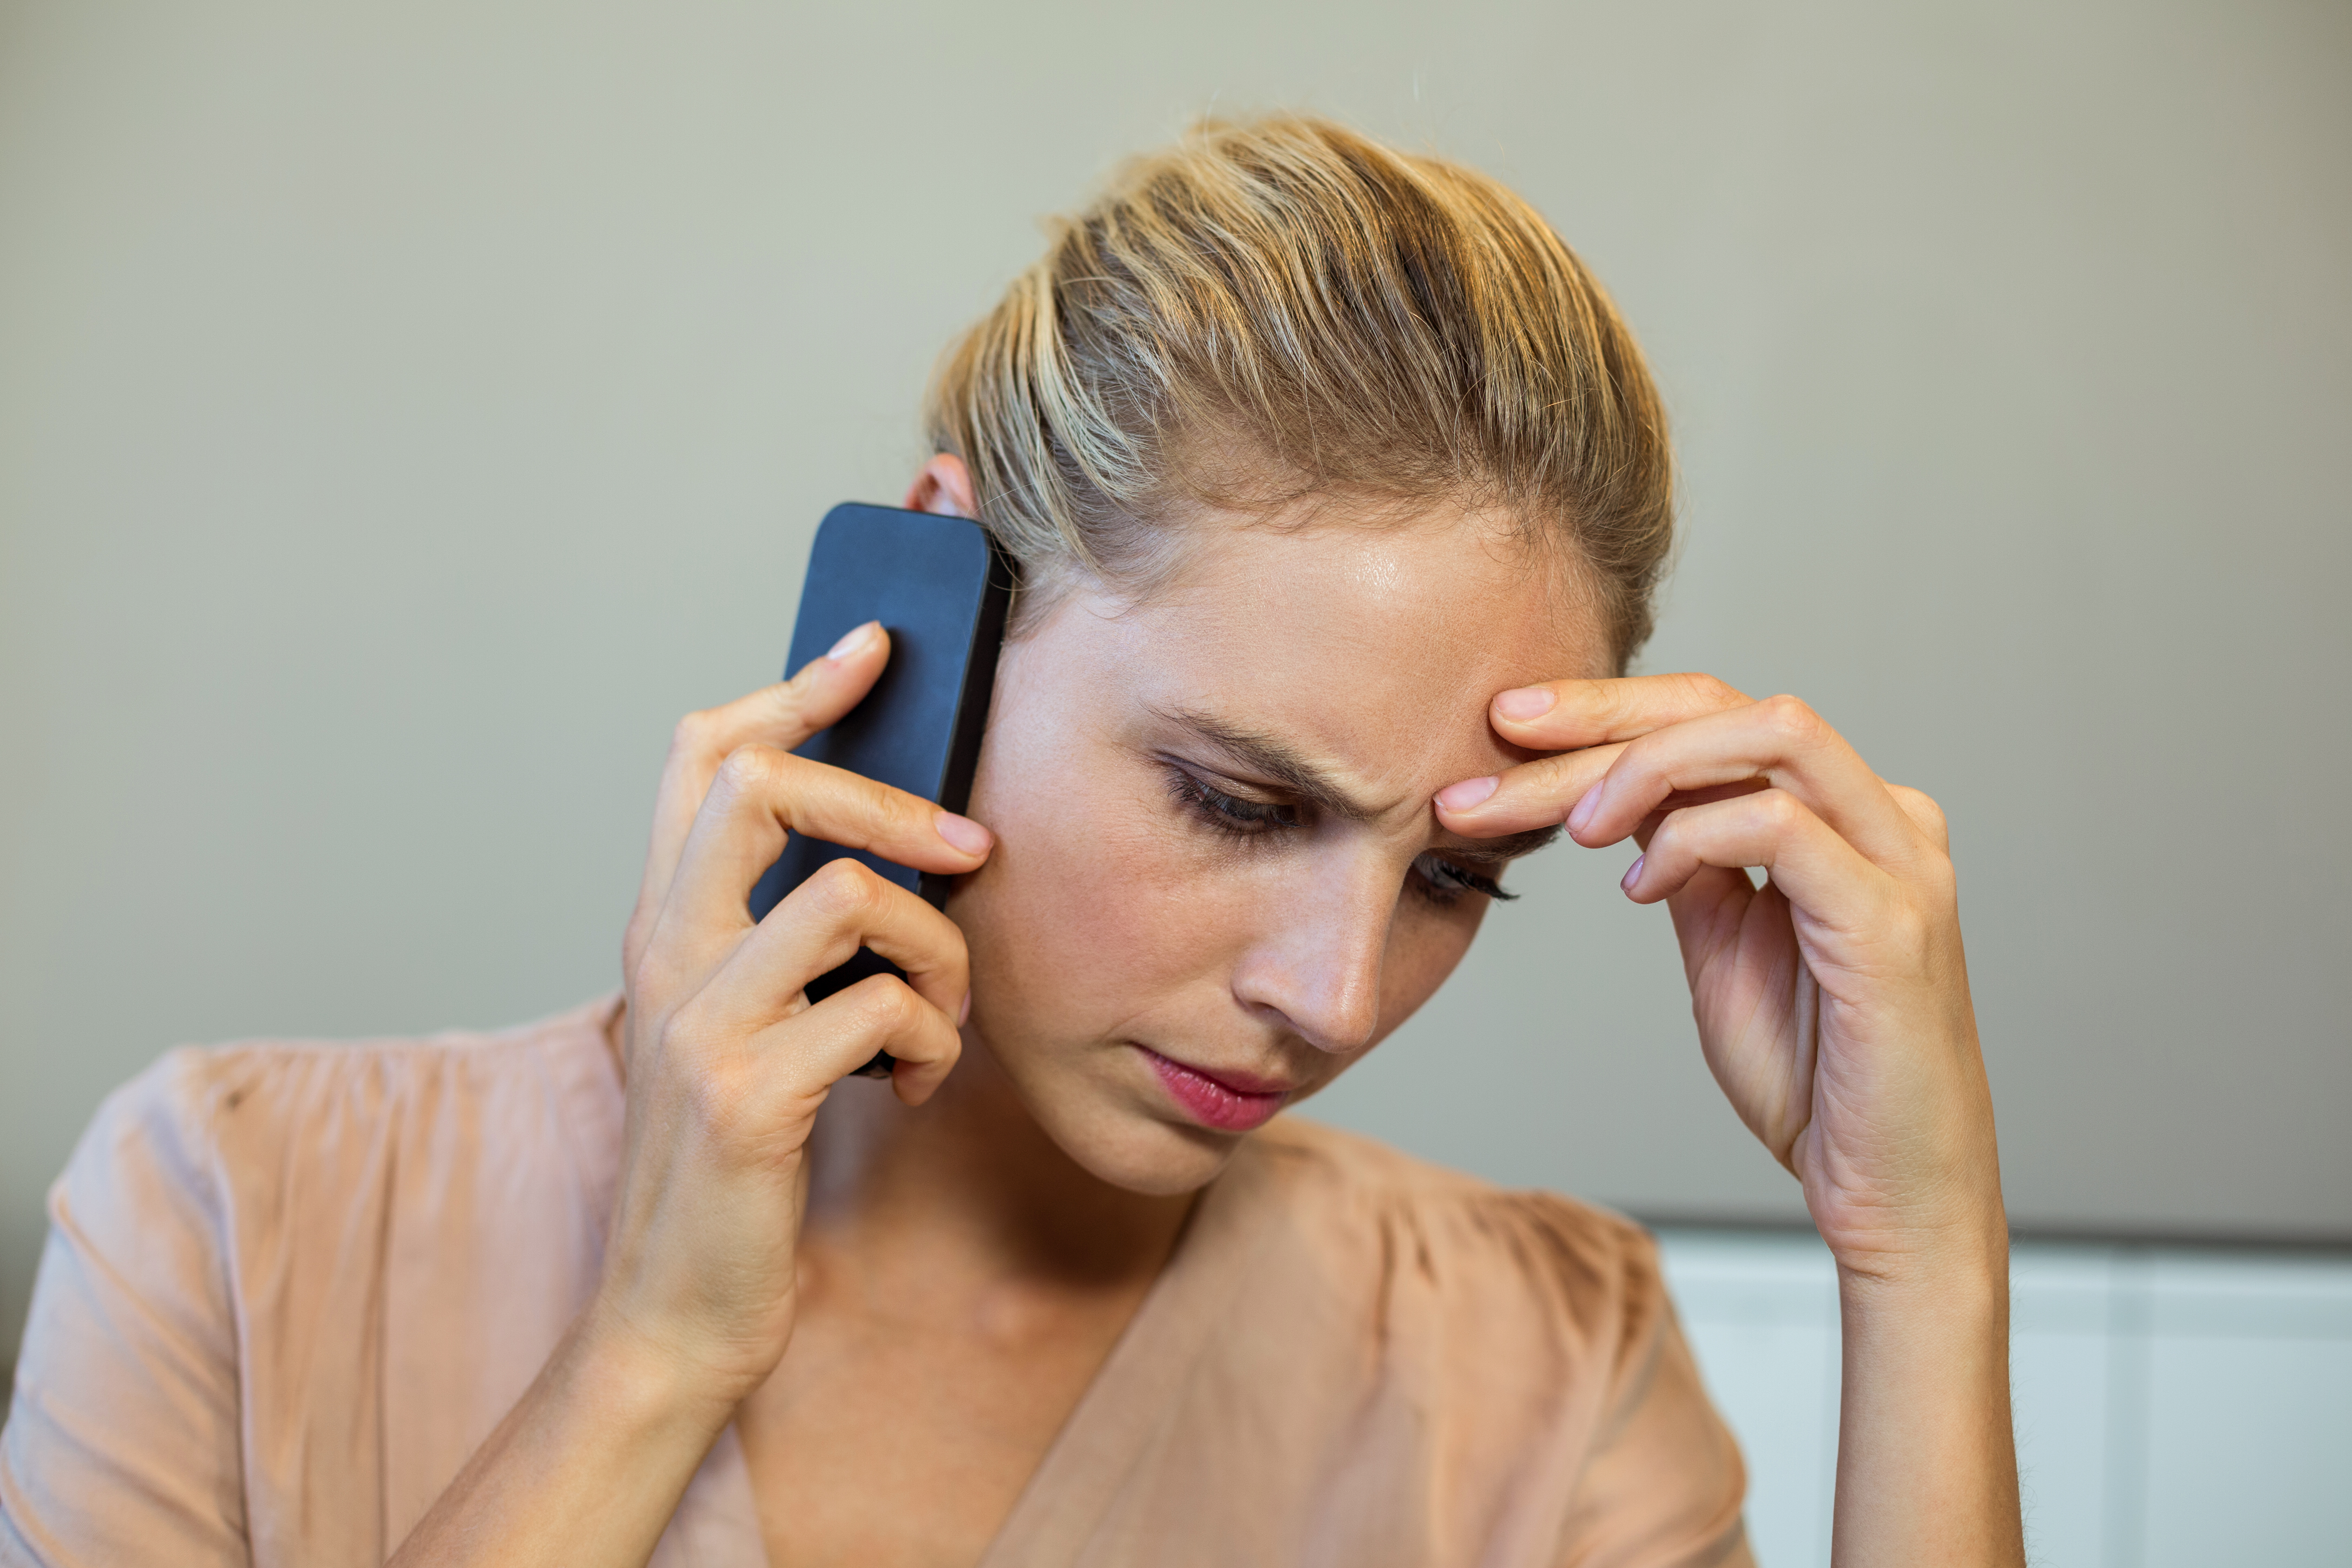 A confused woman on the phone | Source: Shutterstock